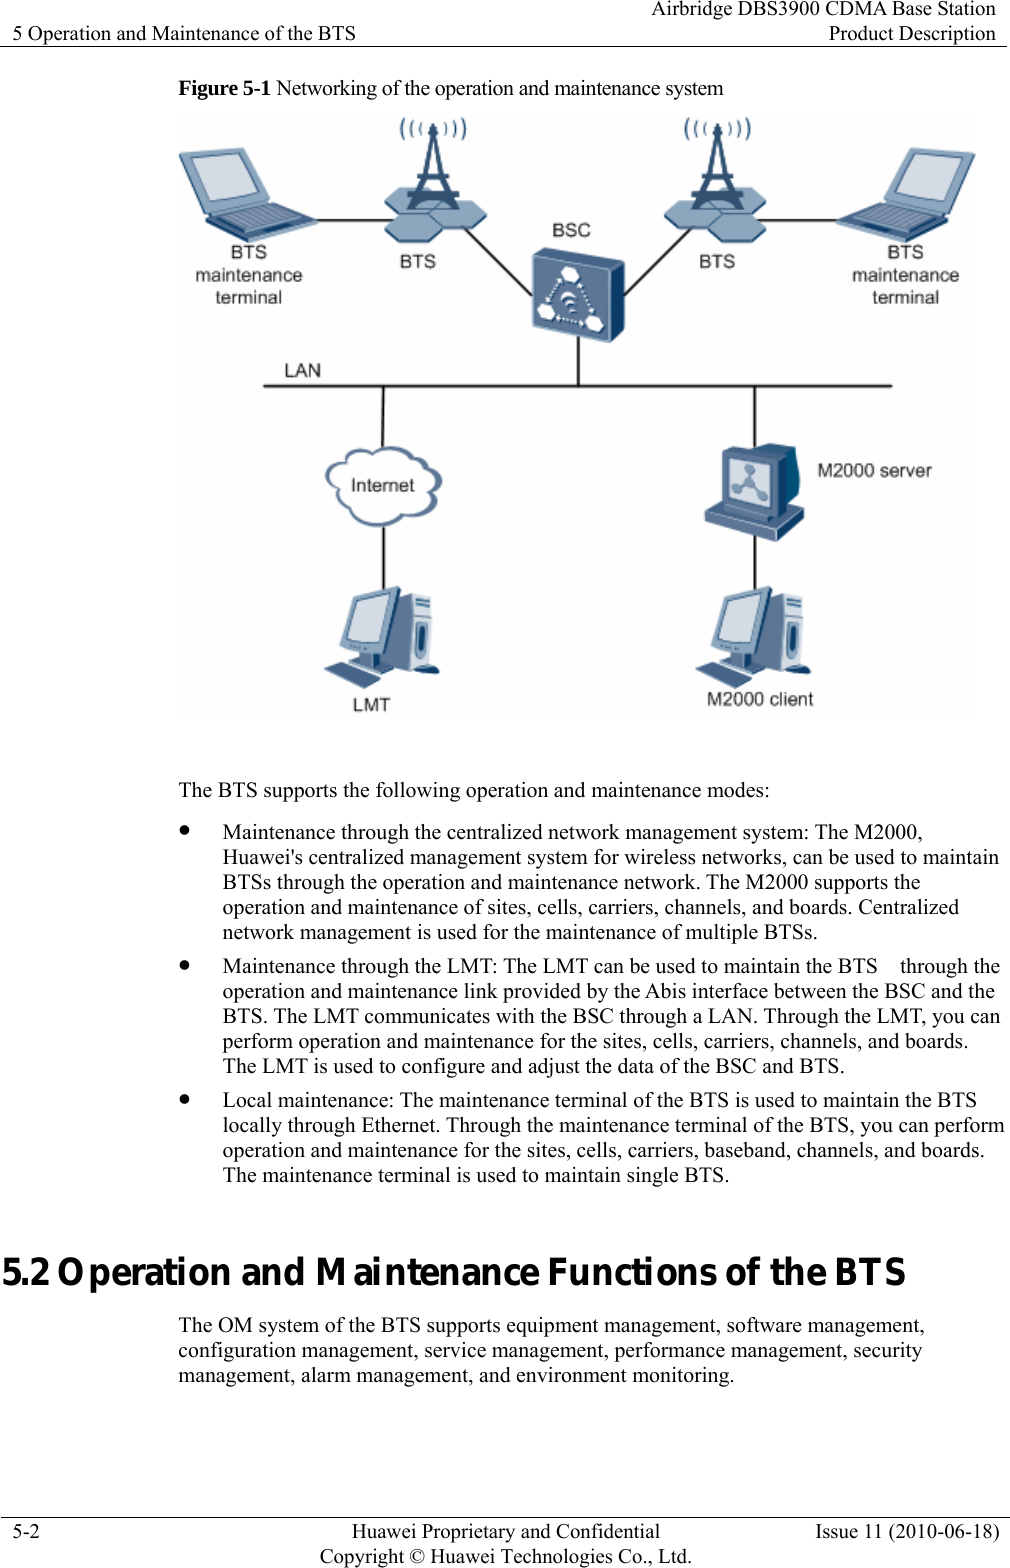 5 Operation and Maintenance of the BTS Airbridge DBS3900 CDMA Base StationProduct Description 5-2  Huawei Proprietary and Confidential     Copyright © Huawei Technologies Co., Ltd.Issue 11 (2010-06-18) Figure 5-1 Networking of the operation and maintenance system   The BTS supports the following operation and maintenance modes: z Maintenance through the centralized network management system: The M2000, Huawei&apos;s centralized management system for wireless networks, can be used to maintain BTSs through the operation and maintenance network. The M2000 supports the operation and maintenance of sites, cells, carriers, channels, and boards. Centralized network management is used for the maintenance of multiple BTSs. z Maintenance through the LMT: The LMT can be used to maintain the BTS    through the operation and maintenance link provided by the Abis interface between the BSC and the BTS. The LMT communicates with the BSC through a LAN. Through the LMT, you can perform operation and maintenance for the sites, cells, carriers, channels, and boards. The LMT is used to configure and adjust the data of the BSC and BTS. z Local maintenance: The maintenance terminal of the BTS is used to maintain the BTS locally through Ethernet. Through the maintenance terminal of the BTS, you can perform operation and maintenance for the sites, cells, carriers, baseband, channels, and boards. The maintenance terminal is used to maintain single BTS. 5.2 Operation and Maintenance Functions of the BTS The OM system of the BTS supports equipment management, software management, configuration management, service management, performance management, security management, alarm management, and environment monitoring. 